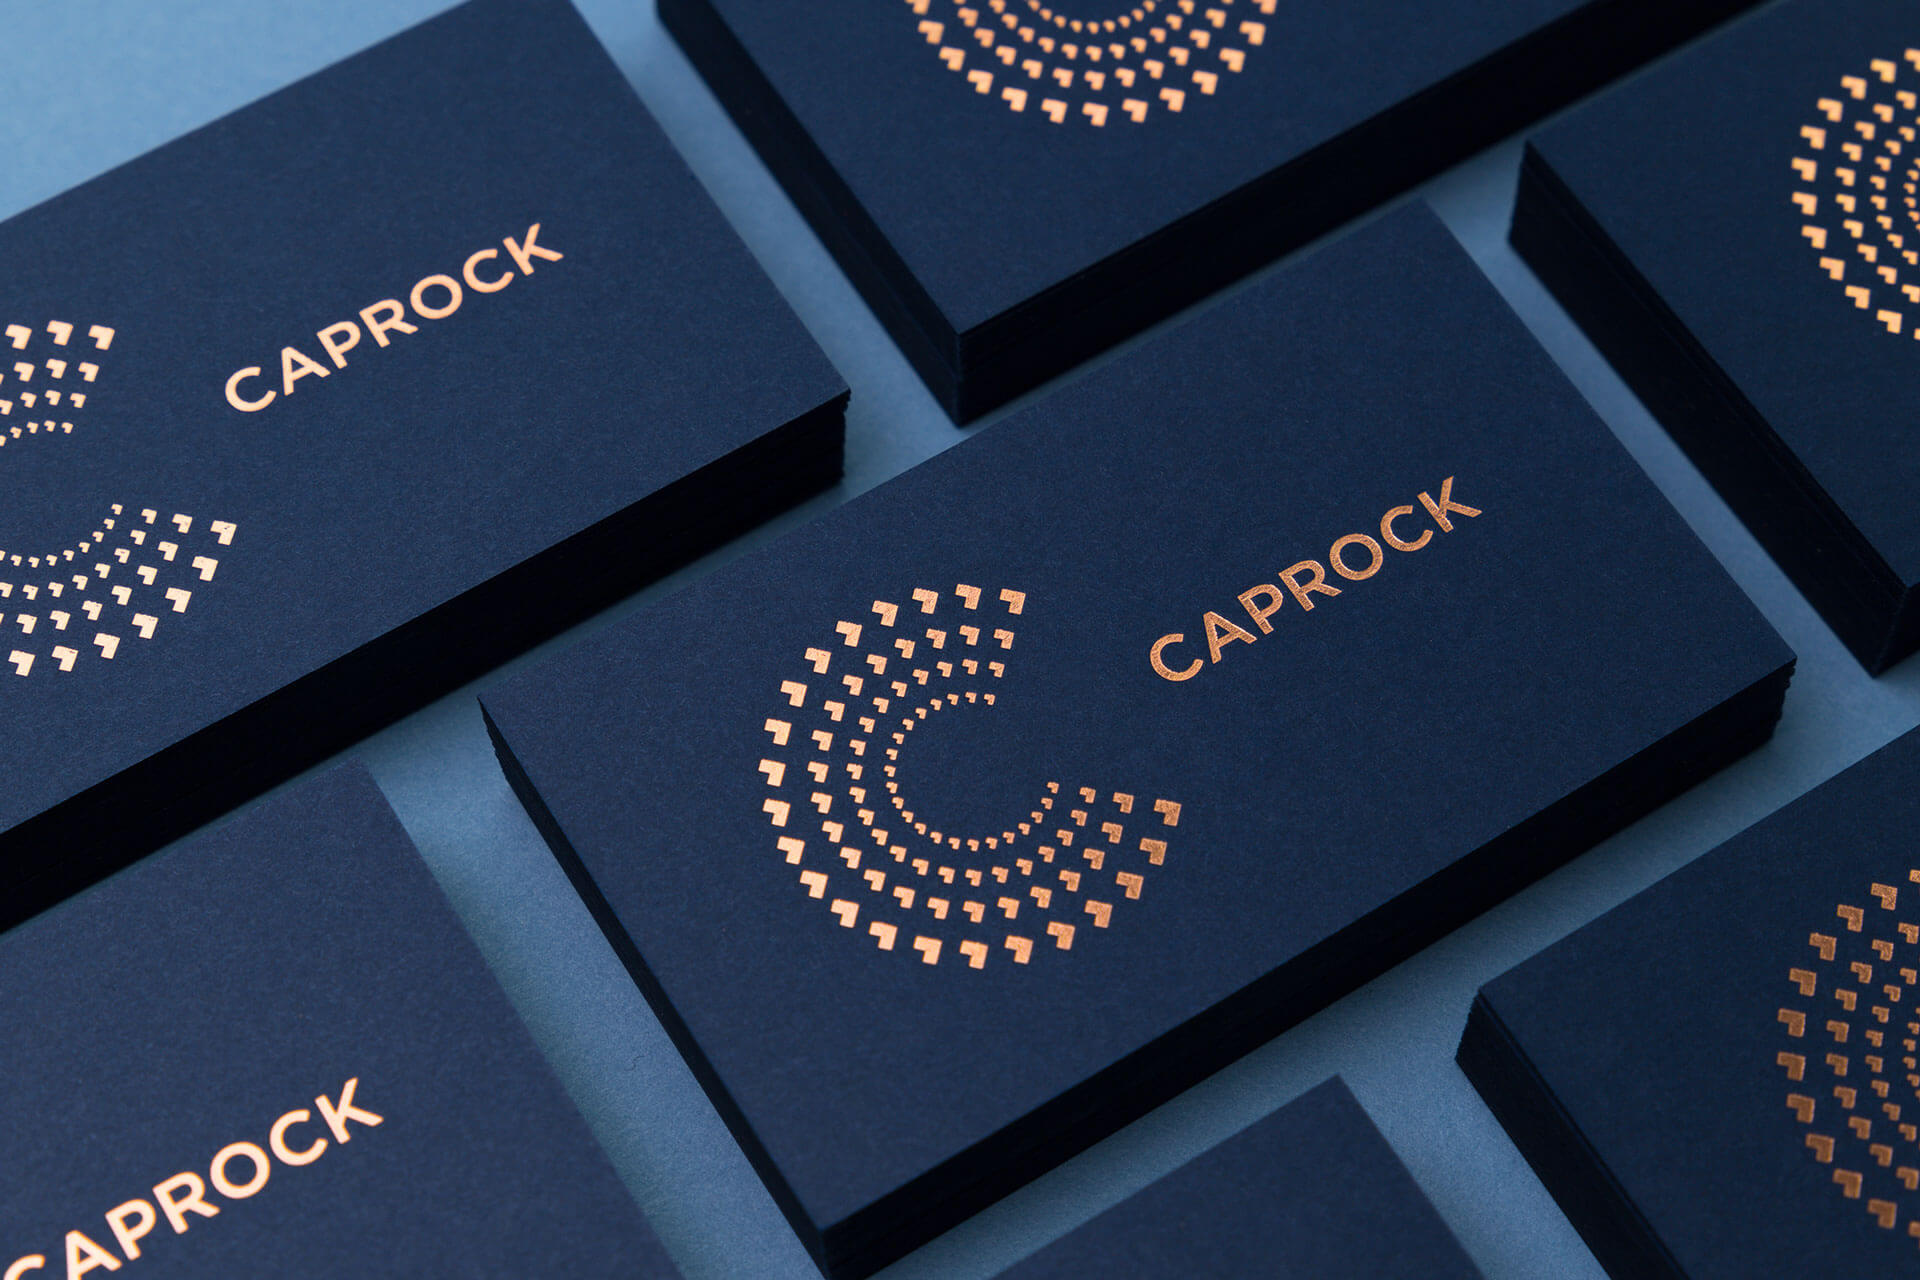 The Caprock Group